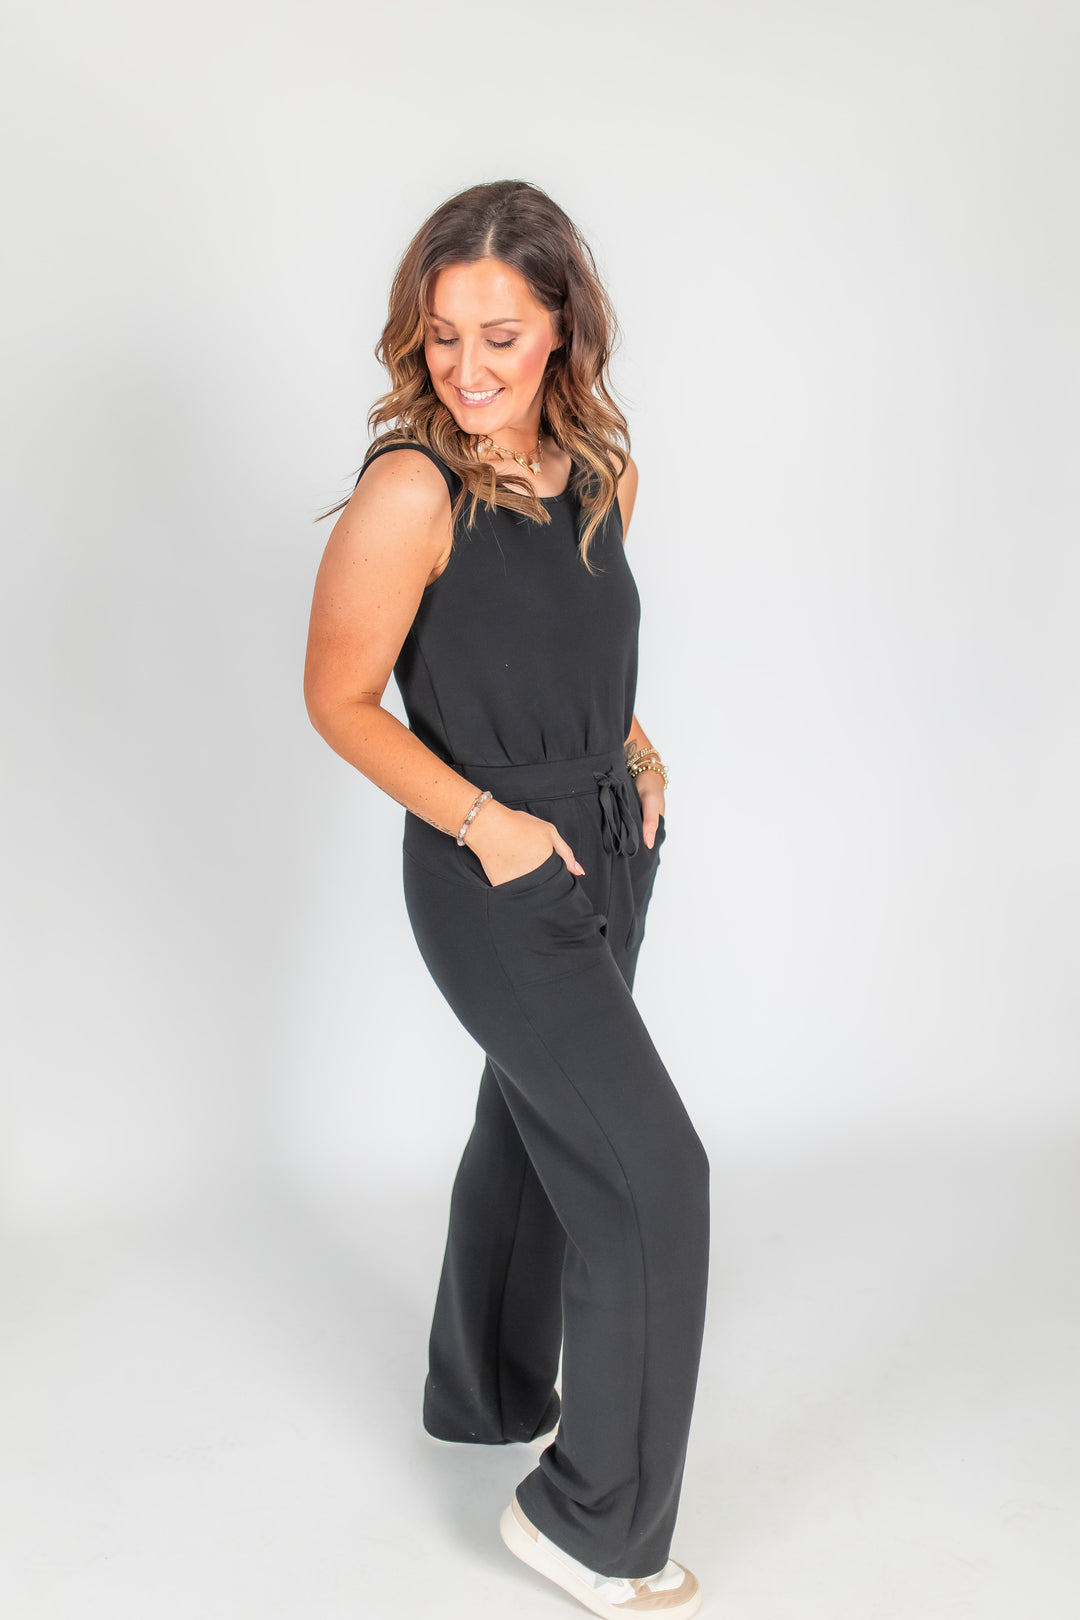 The Seize The Day Jumpsuit